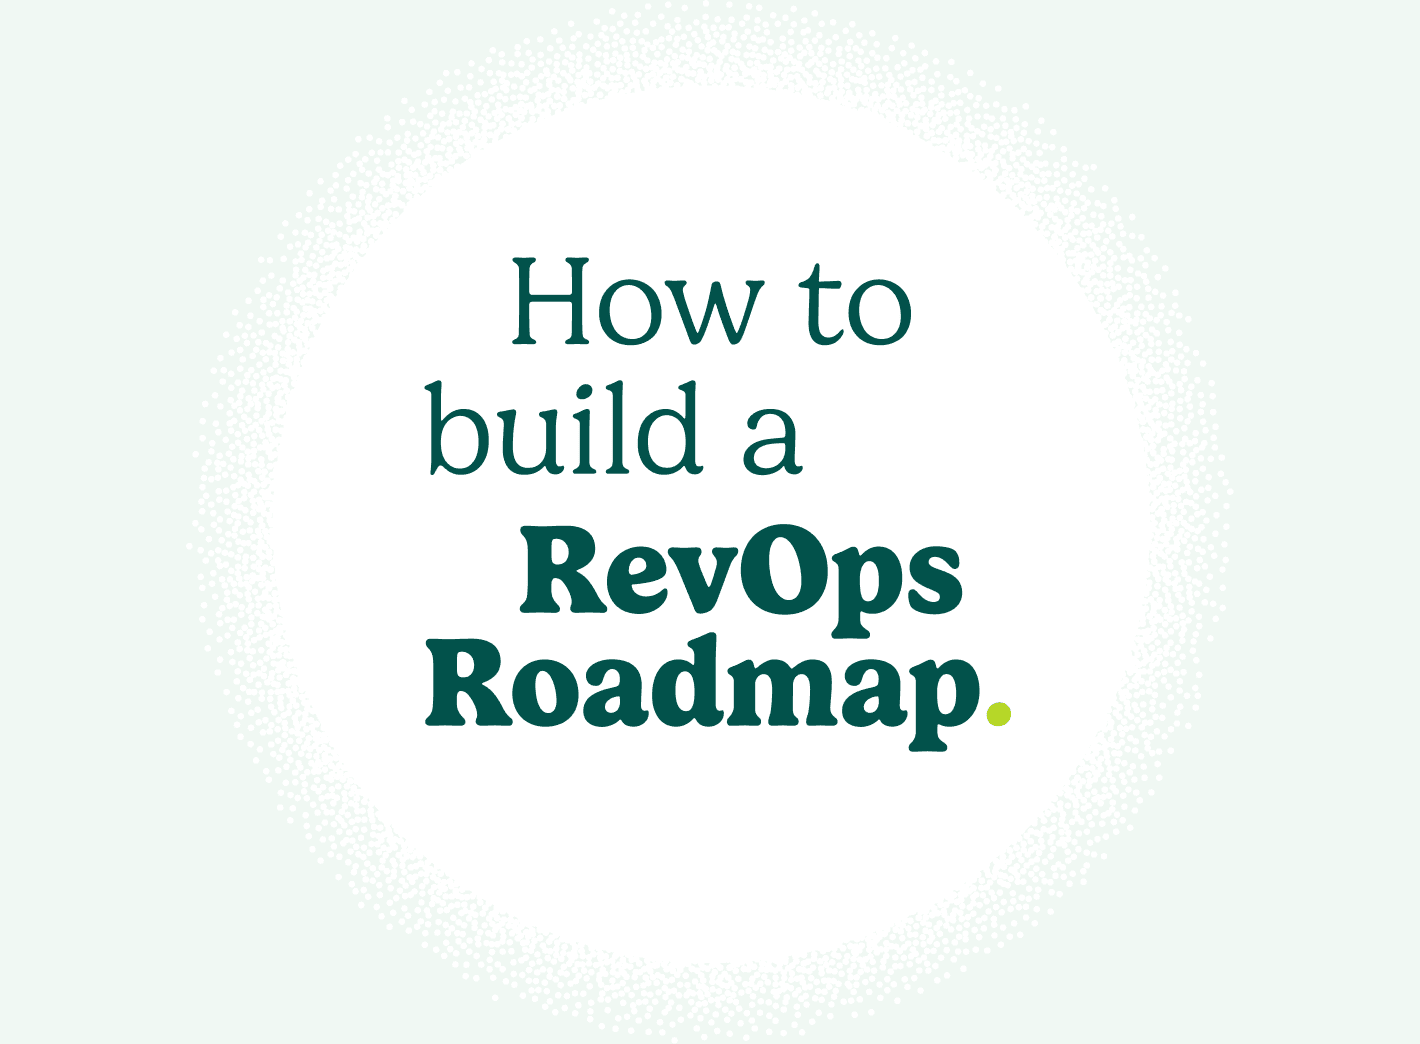 "How to build a RevOps Roadmap"